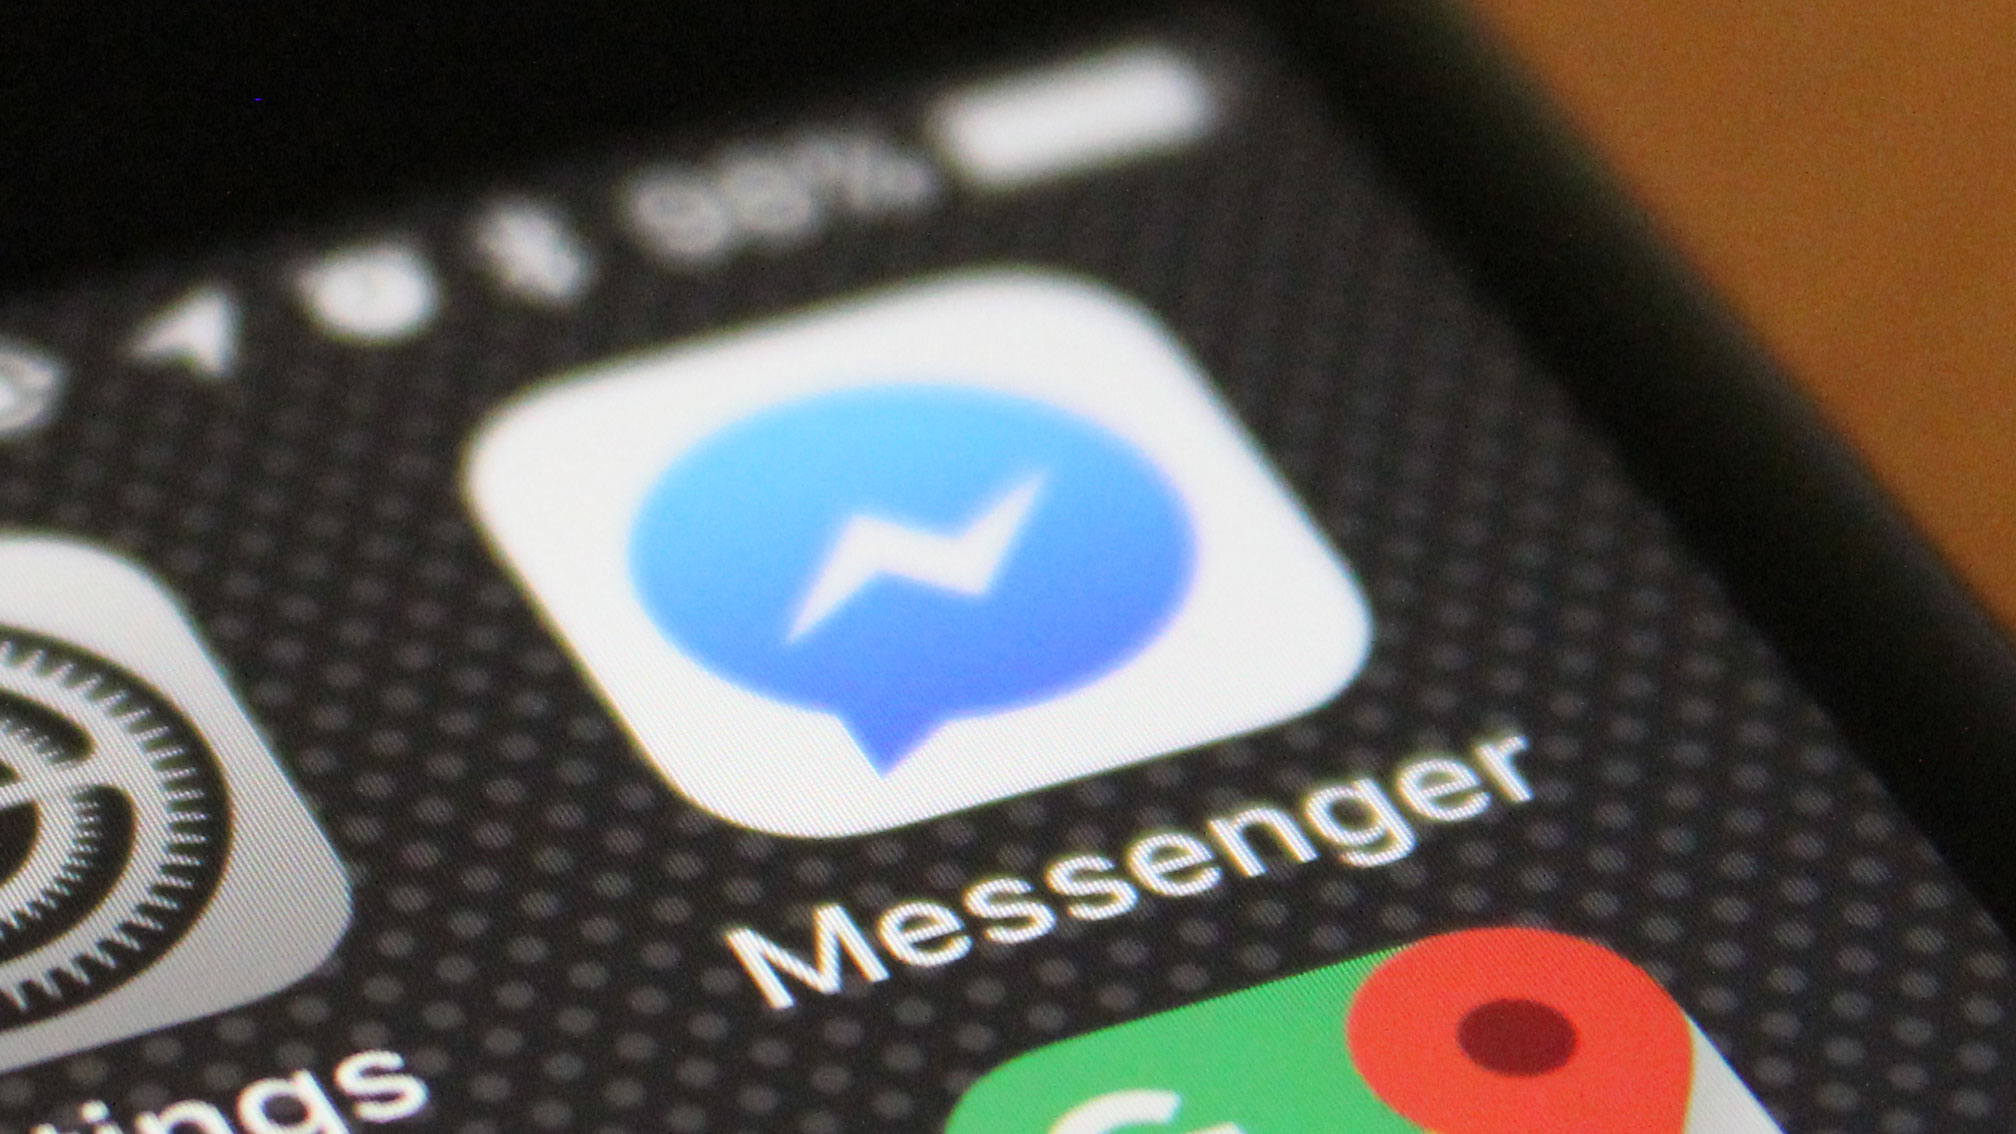 A bug is messing up the keyboard for some Messenger users on iPhones